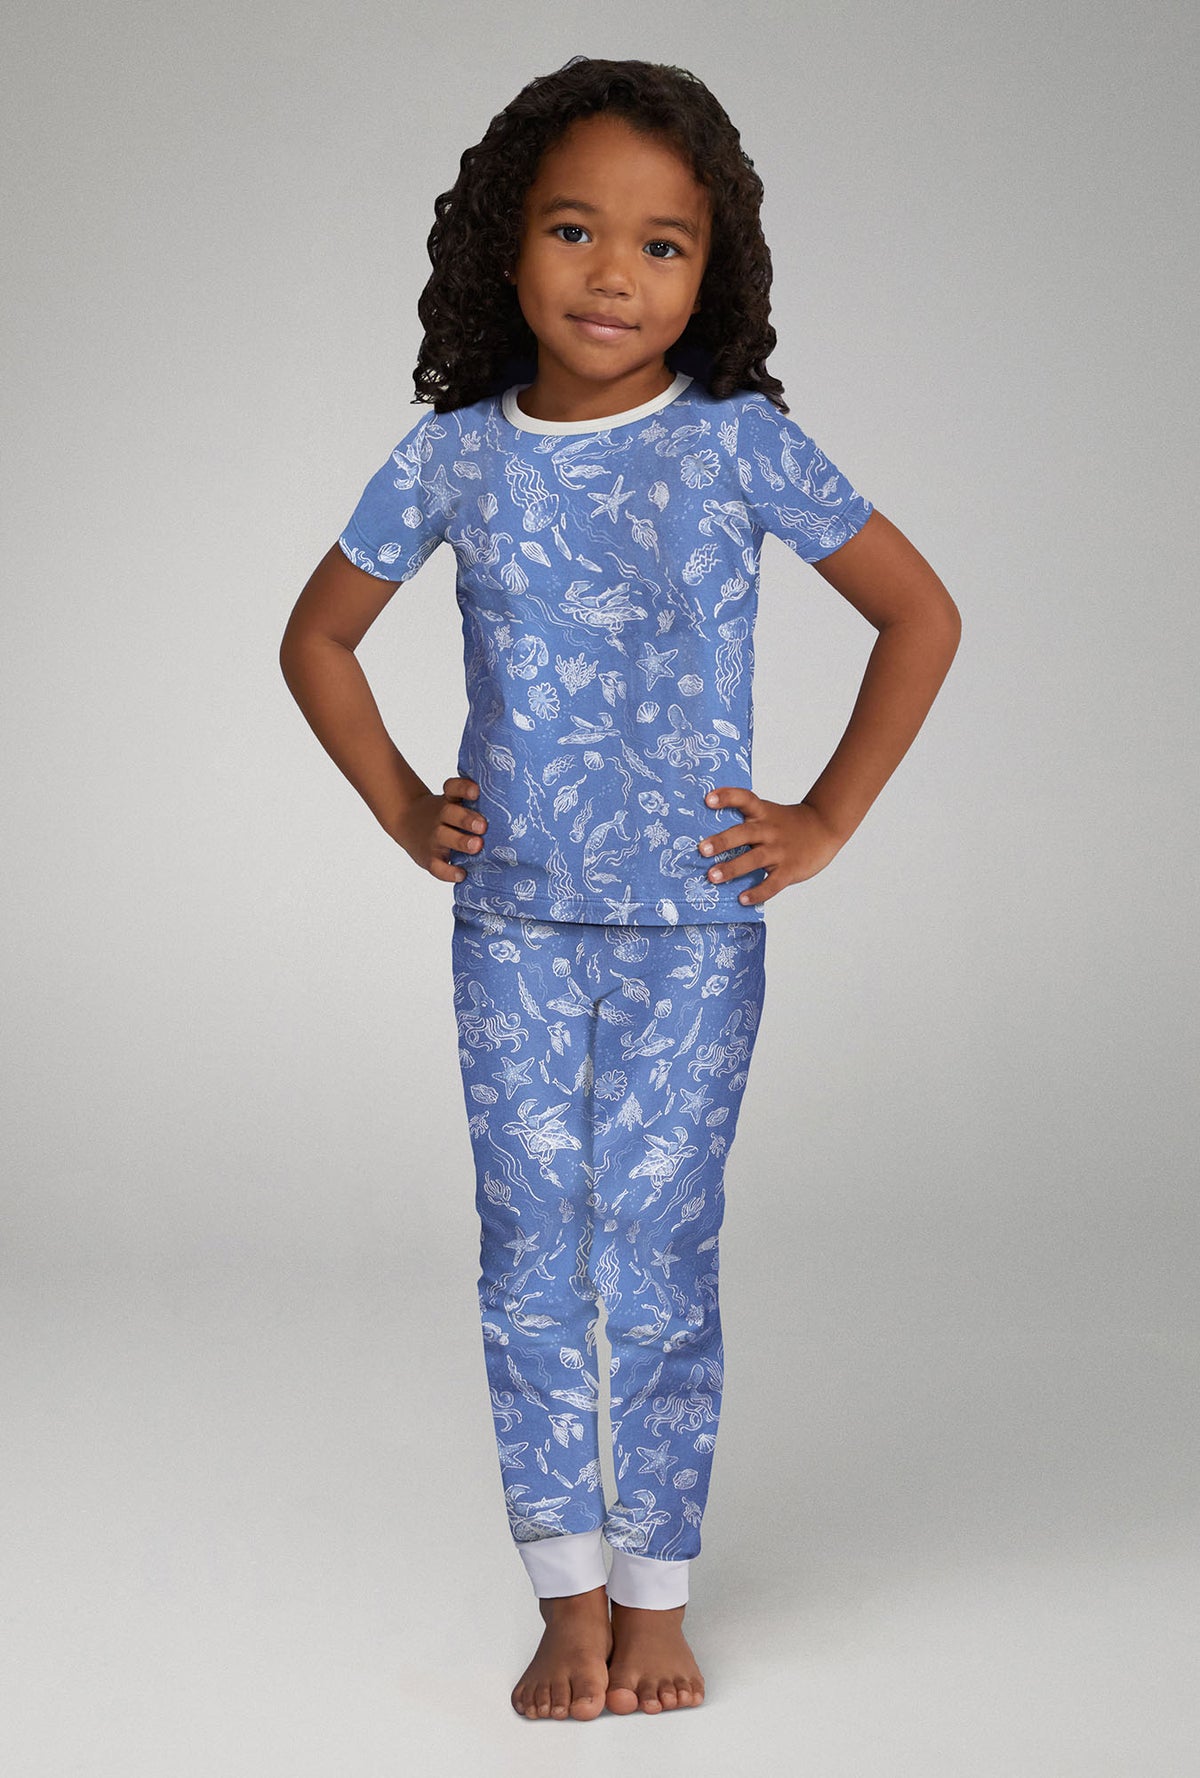 A girl wearing blue short sleeve stretch jersey pj set with high tide print.